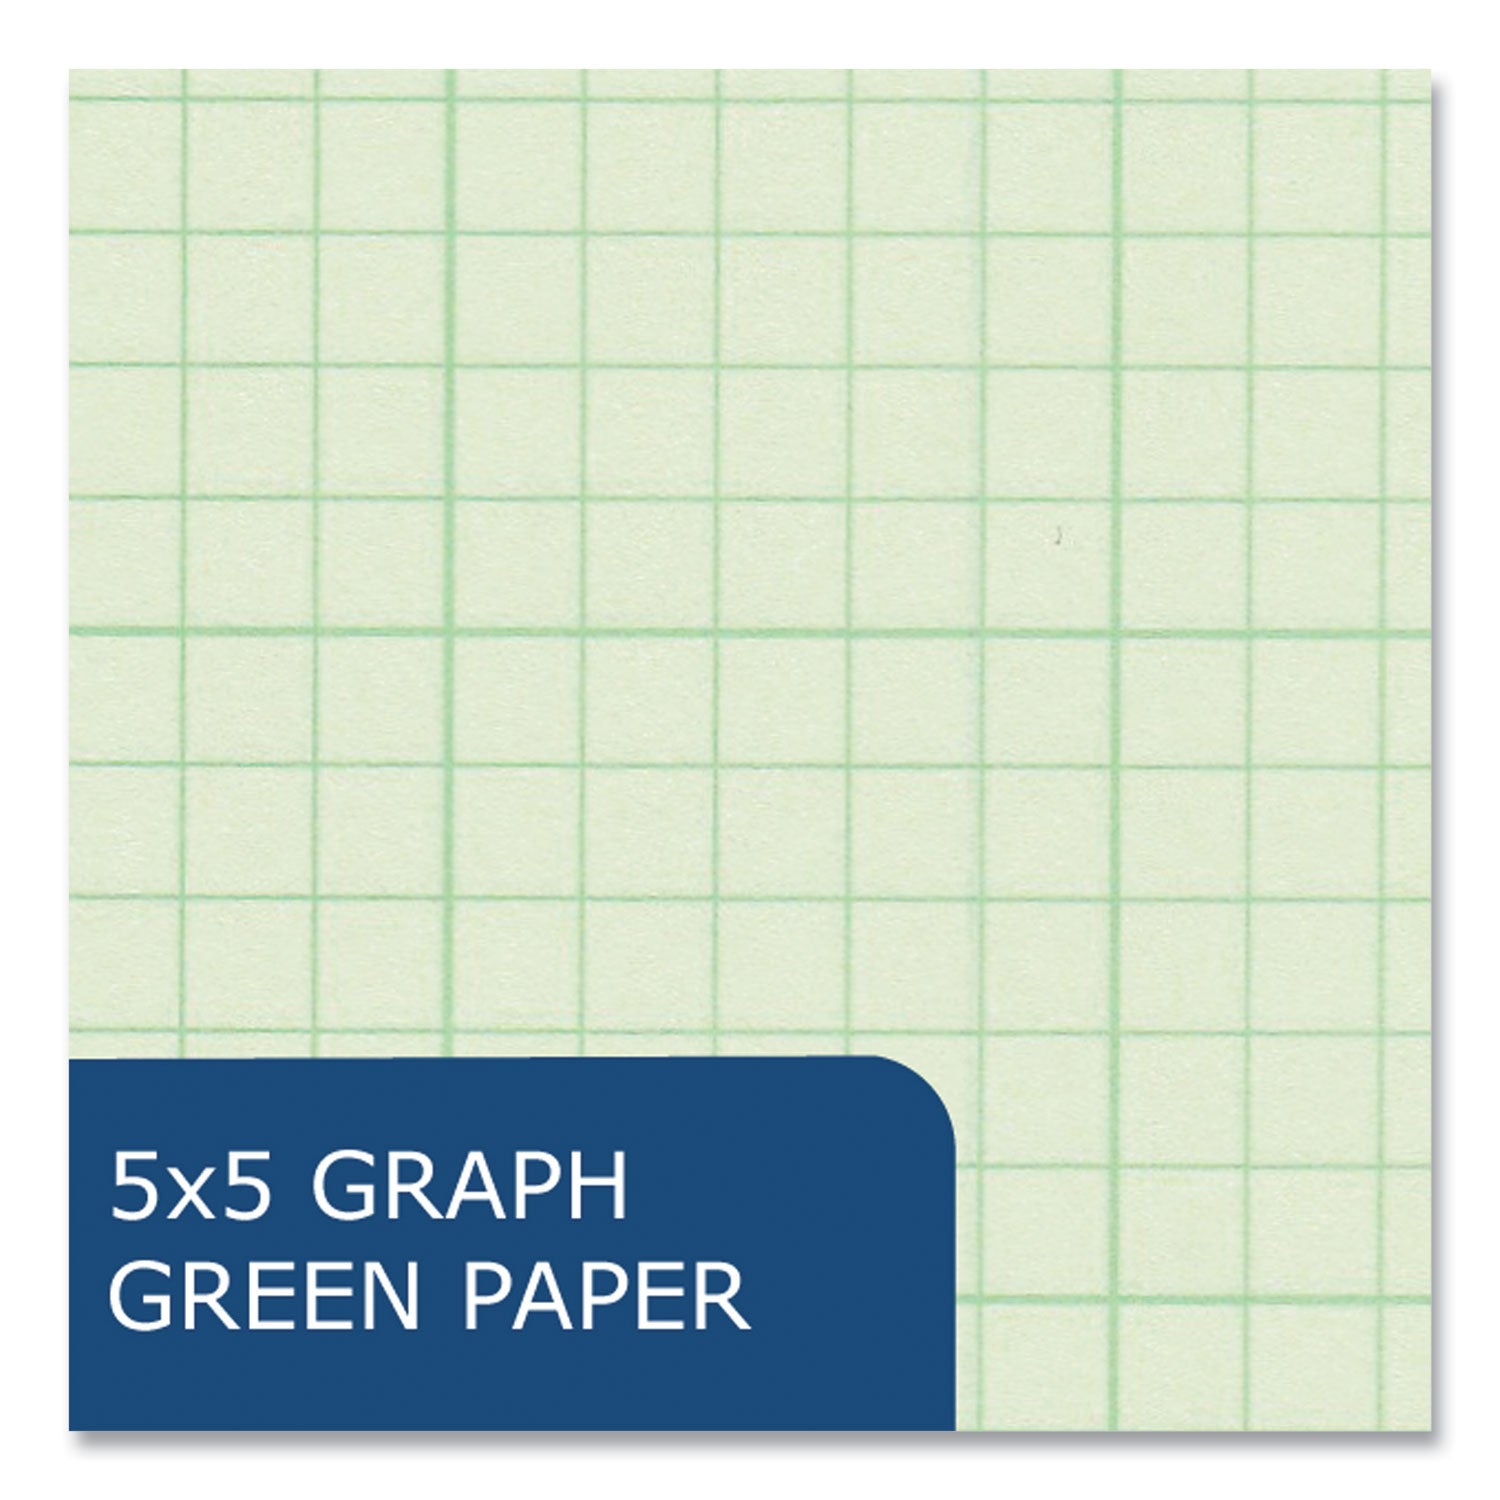 engineer-pad-125-margin-quad-rule-5-sq-in-1-sq-in-100-lt-green-85x11-sheets-pad-24-ct-ships-in-4-6-business-days_roa95582cs - 7